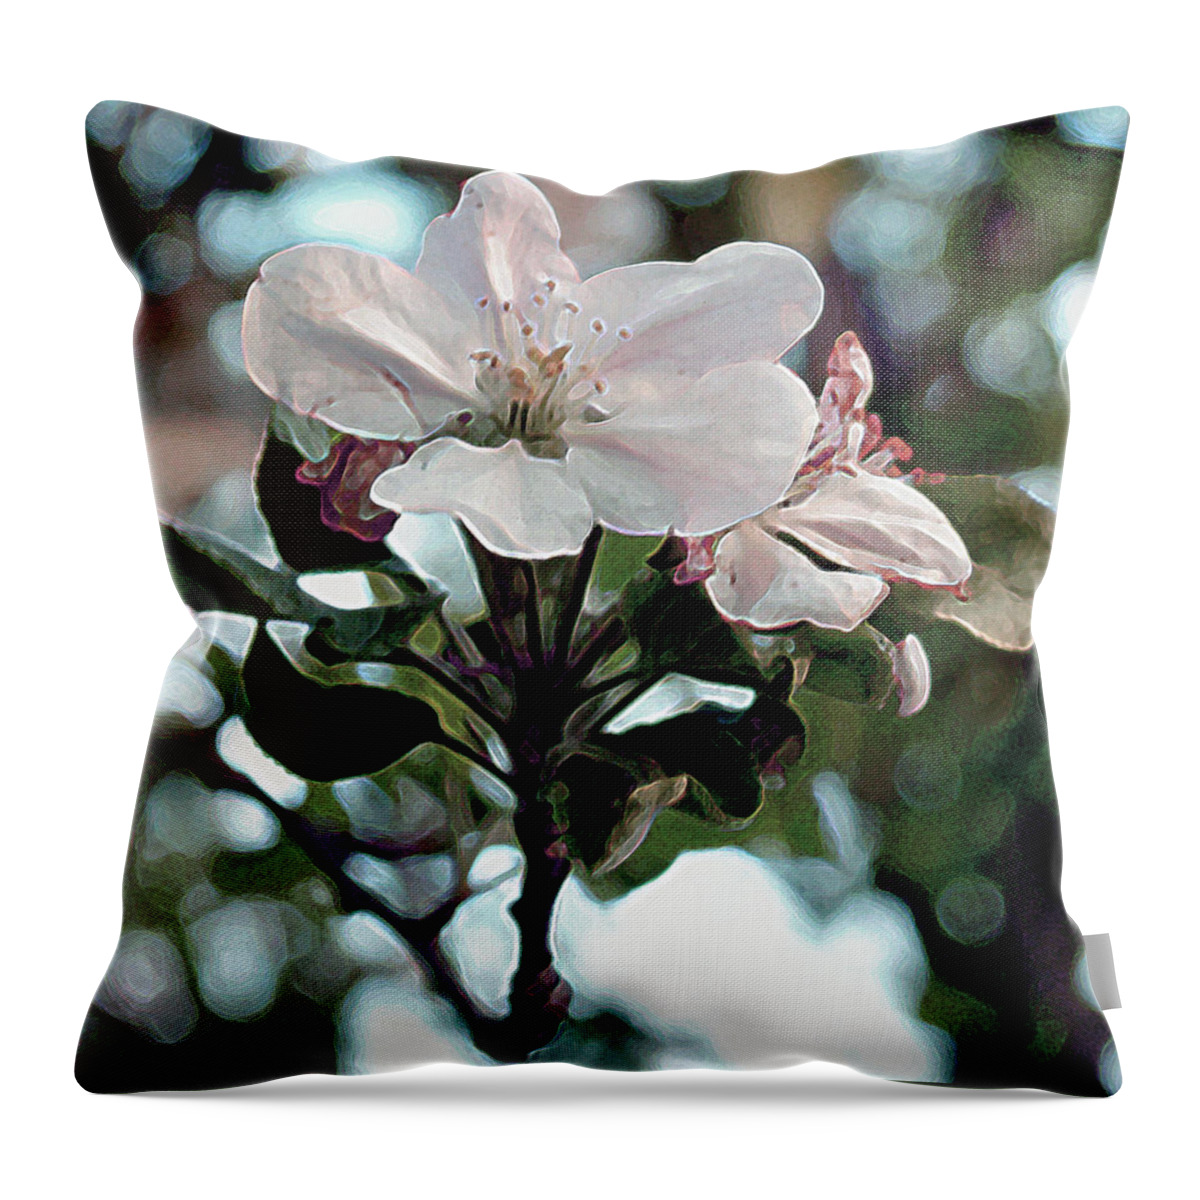 Flowers Throw Pillow featuring the painting Apple Blossom Time by RC DeWinter